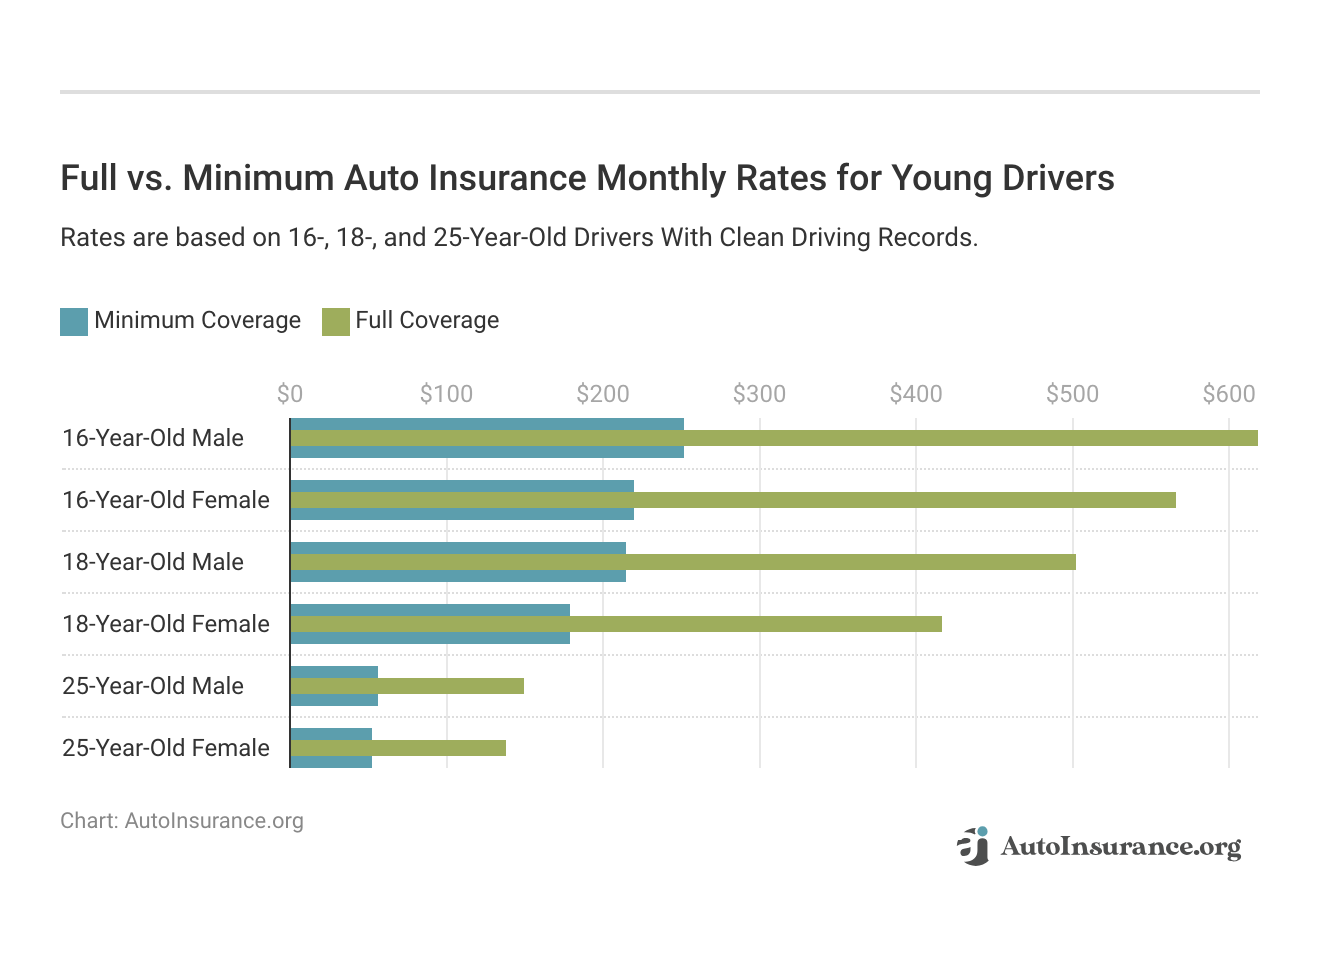 <h3>Full vs. Minimum Auto Insurance Monthly Rates for Young Drivers</h3>